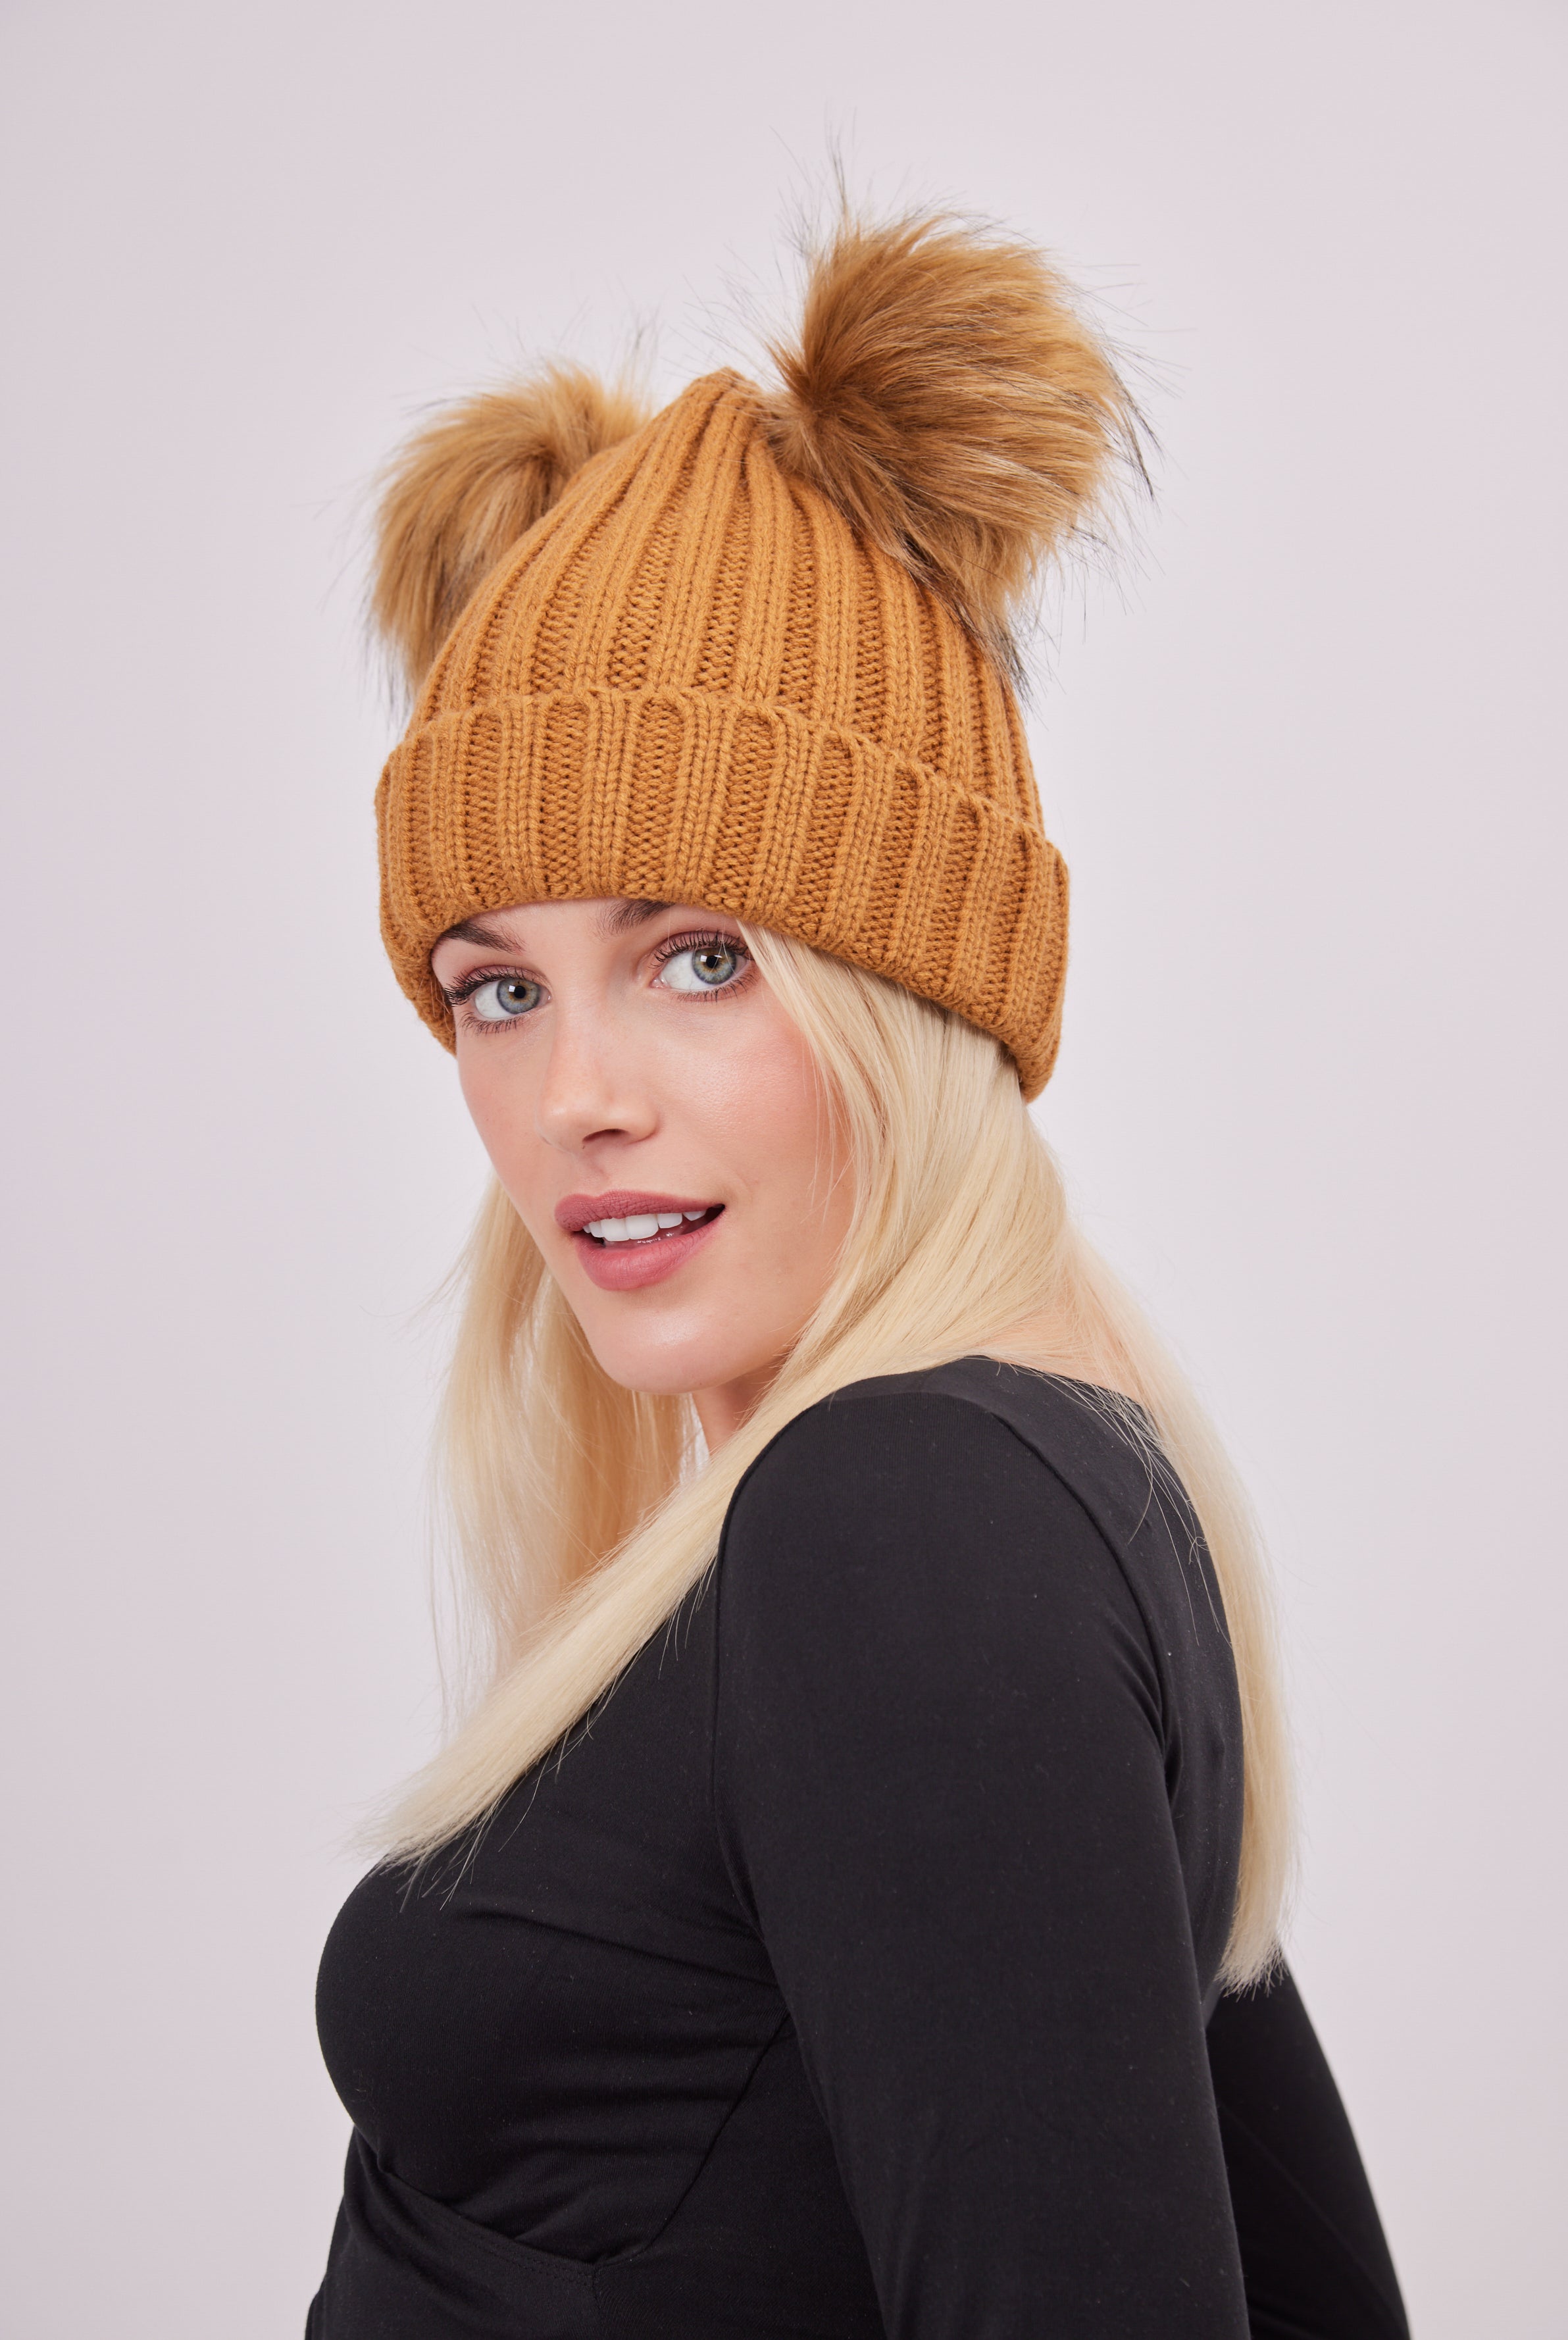 My Accessories London Knitted Double Fur Pom Beanie in Brown | Knitted | Winter Accessories | Women | Women's | Accessories | Accessory | Fluffy | Vegan | Ski | Warm